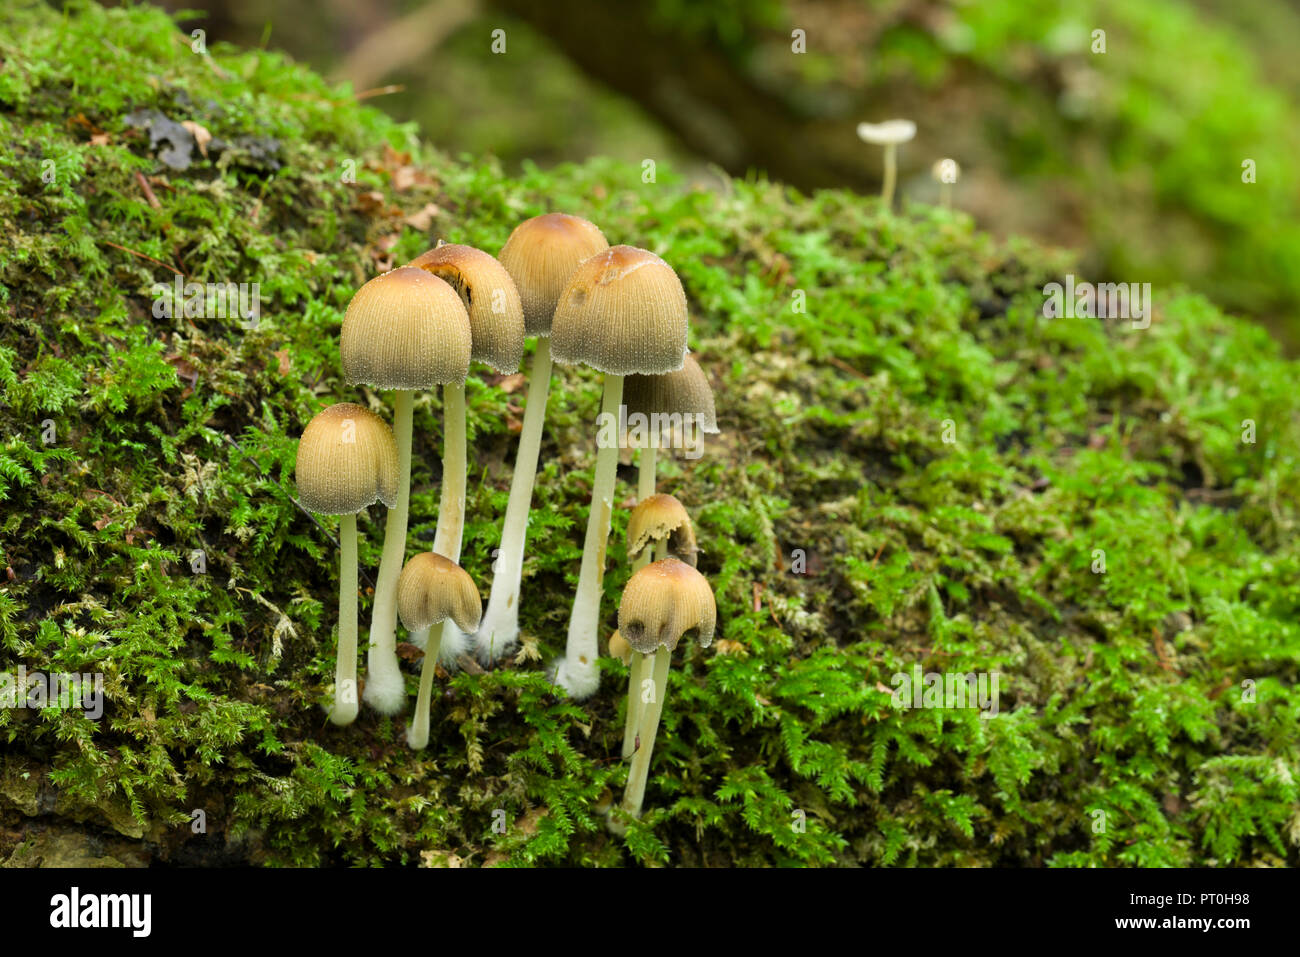 A troop of Glistening Inkcap (Coprinellus micaceus) mushrooms growing on a moss covered log in woodland. Goblin Combe, North Somerset, England. Stock Photo